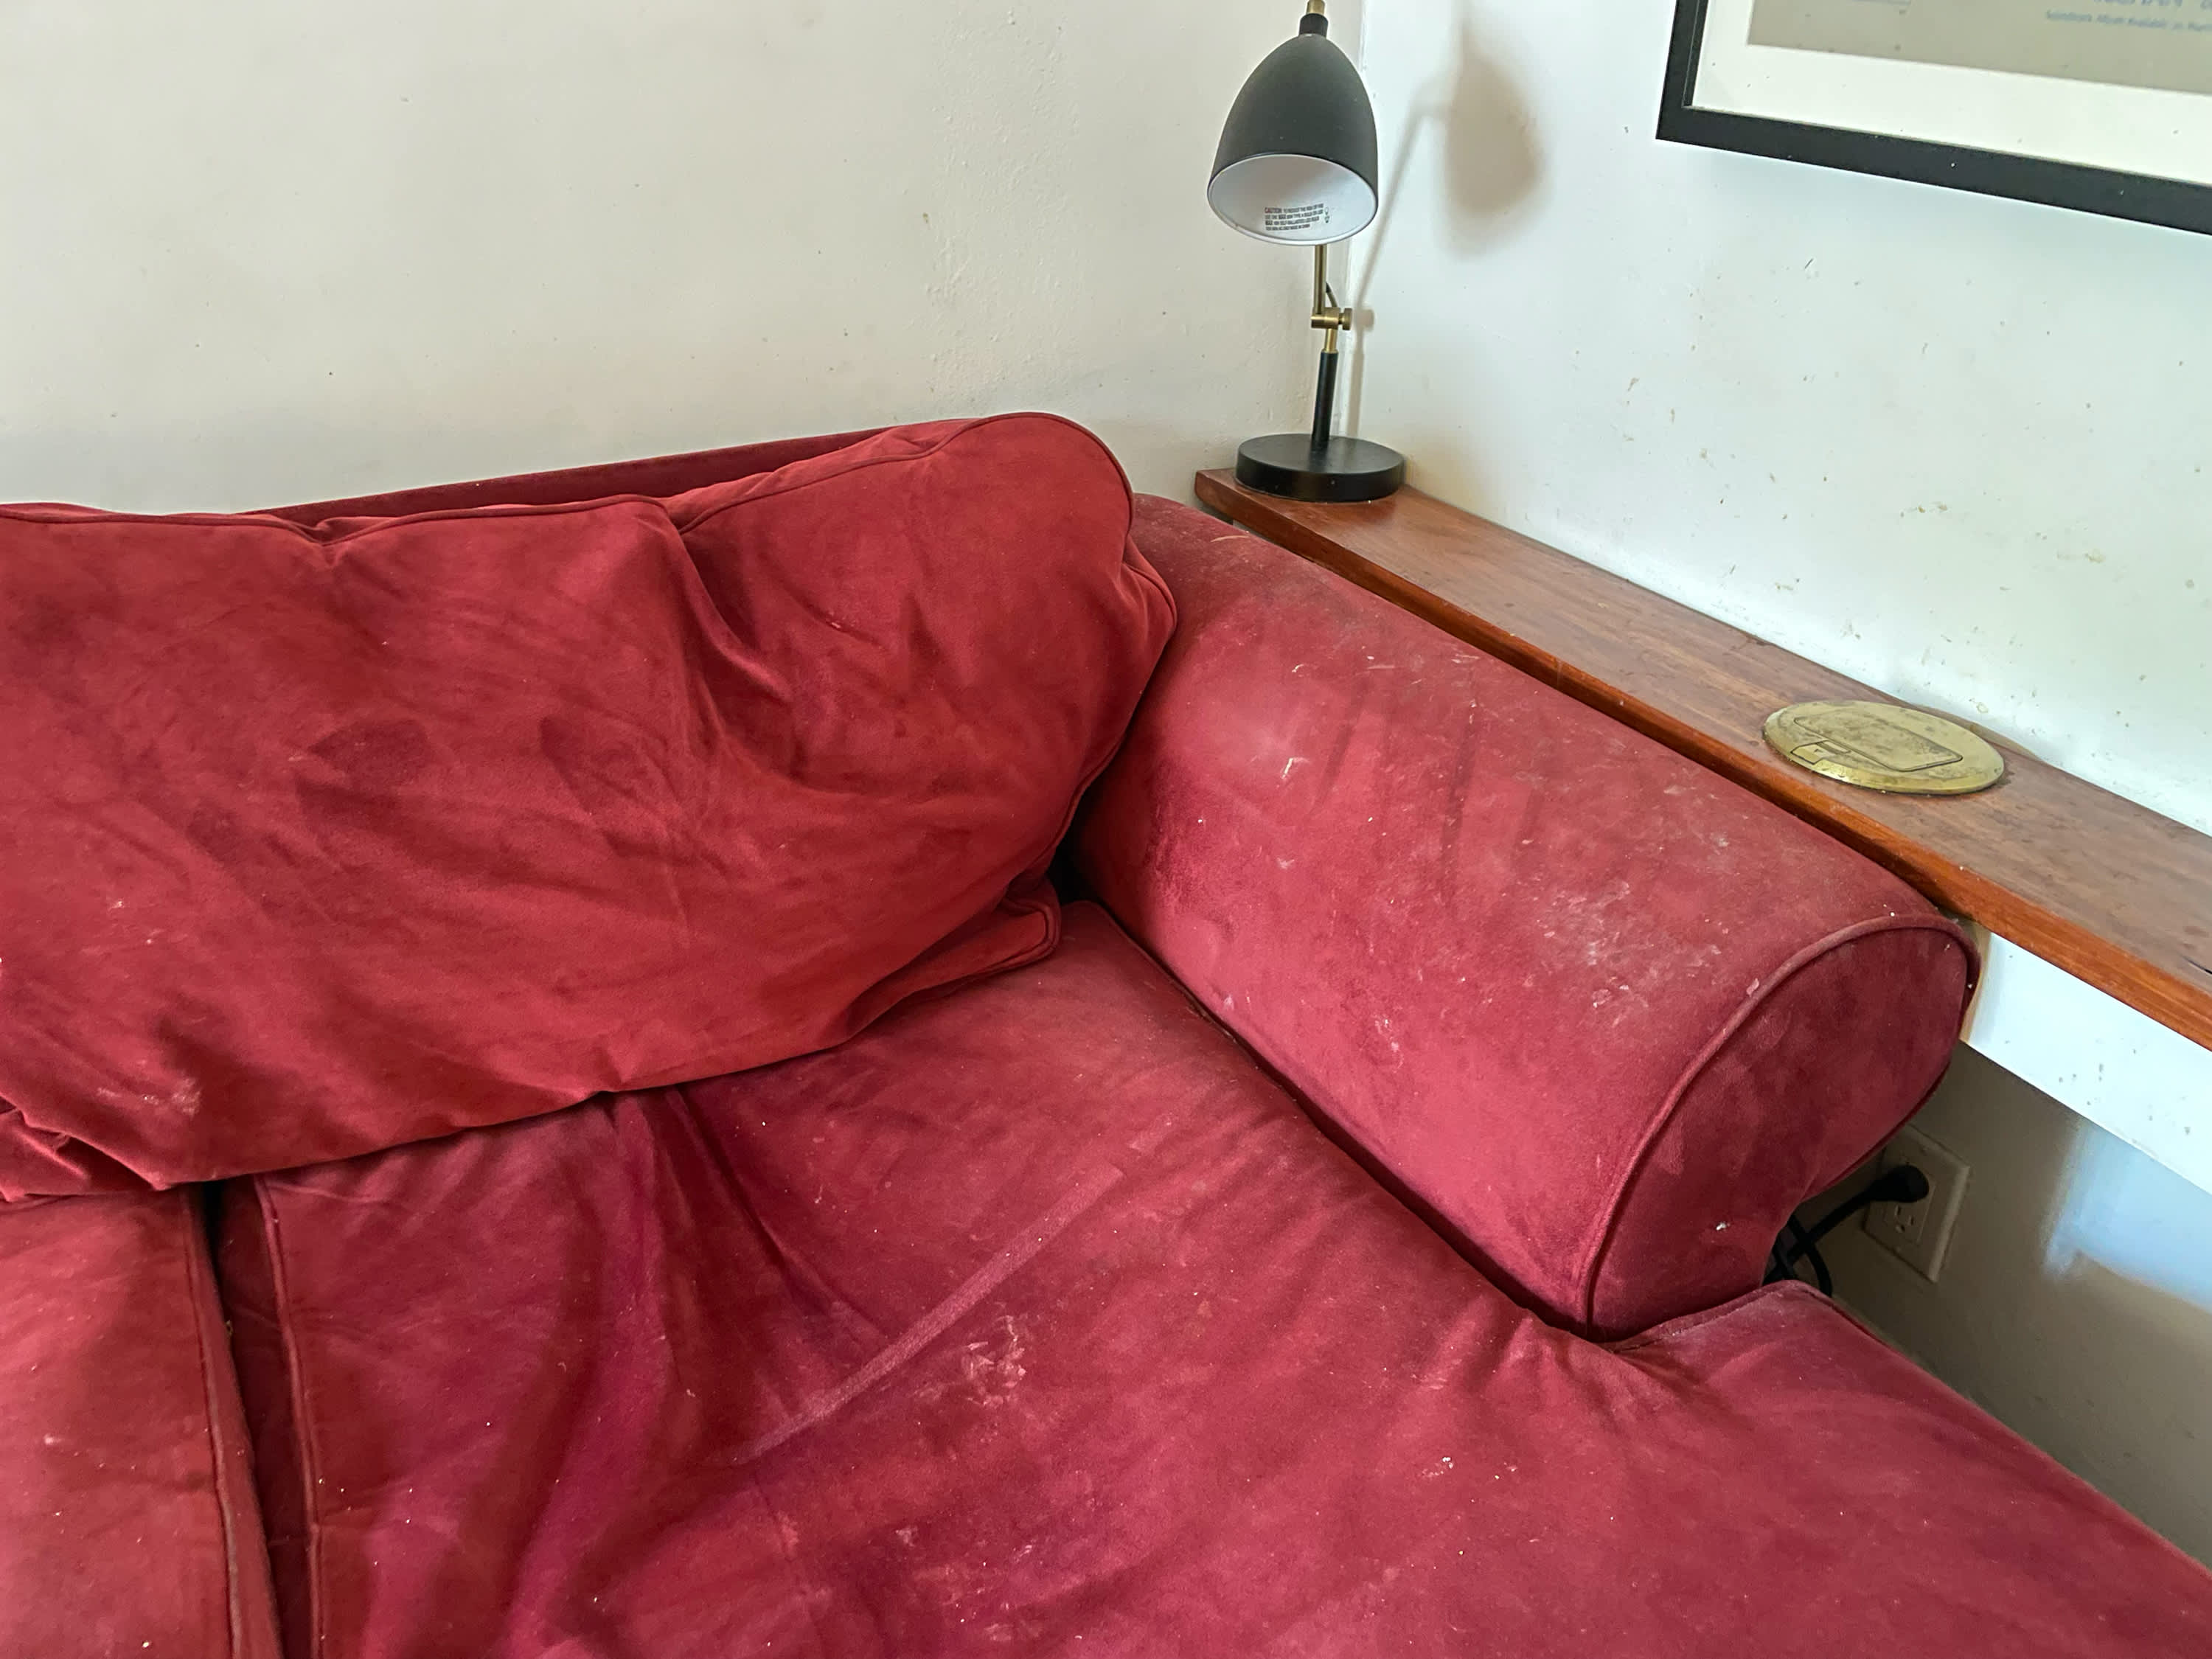 Upholstery - What I Learned From Hiring It Out